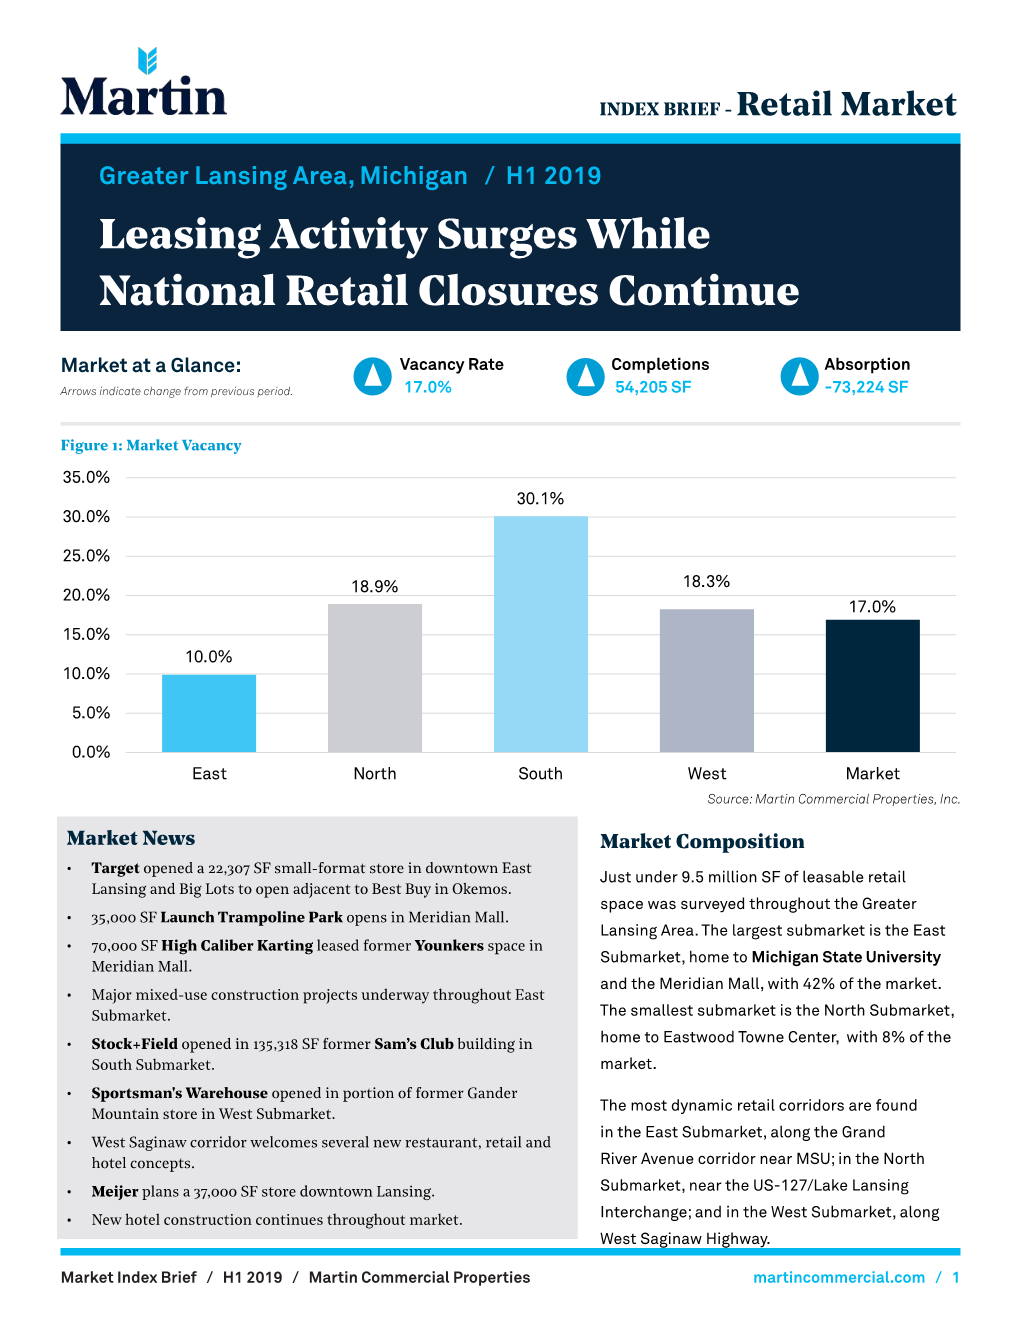 Leasing Activity Surges While National Retail Closures Continue